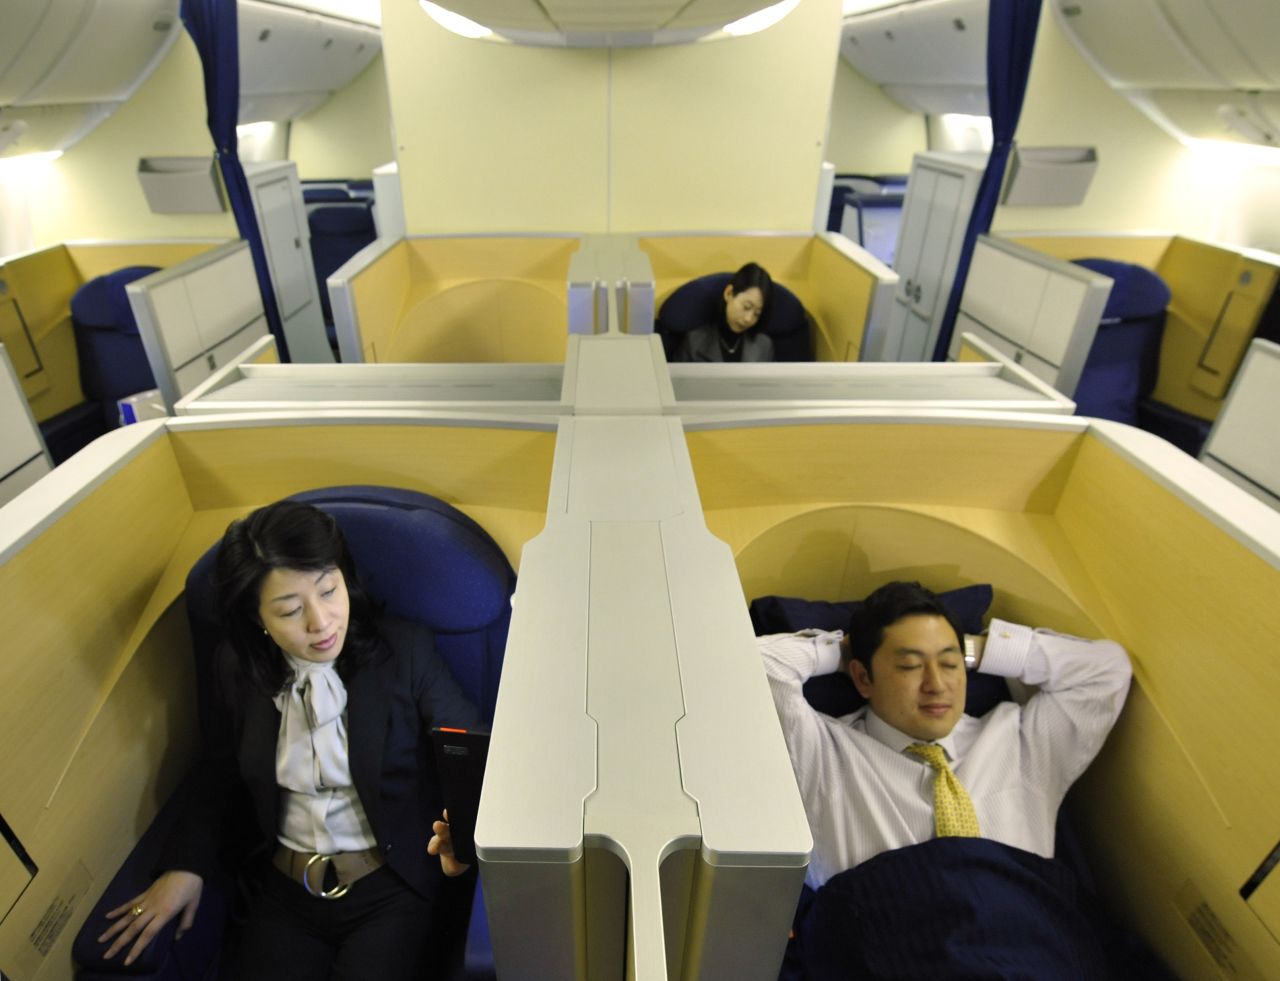 First class seats on Japan's Nippon Airways provide closed off spaces for undisturbed relaxation. The airline took sixth place in this year's awards.